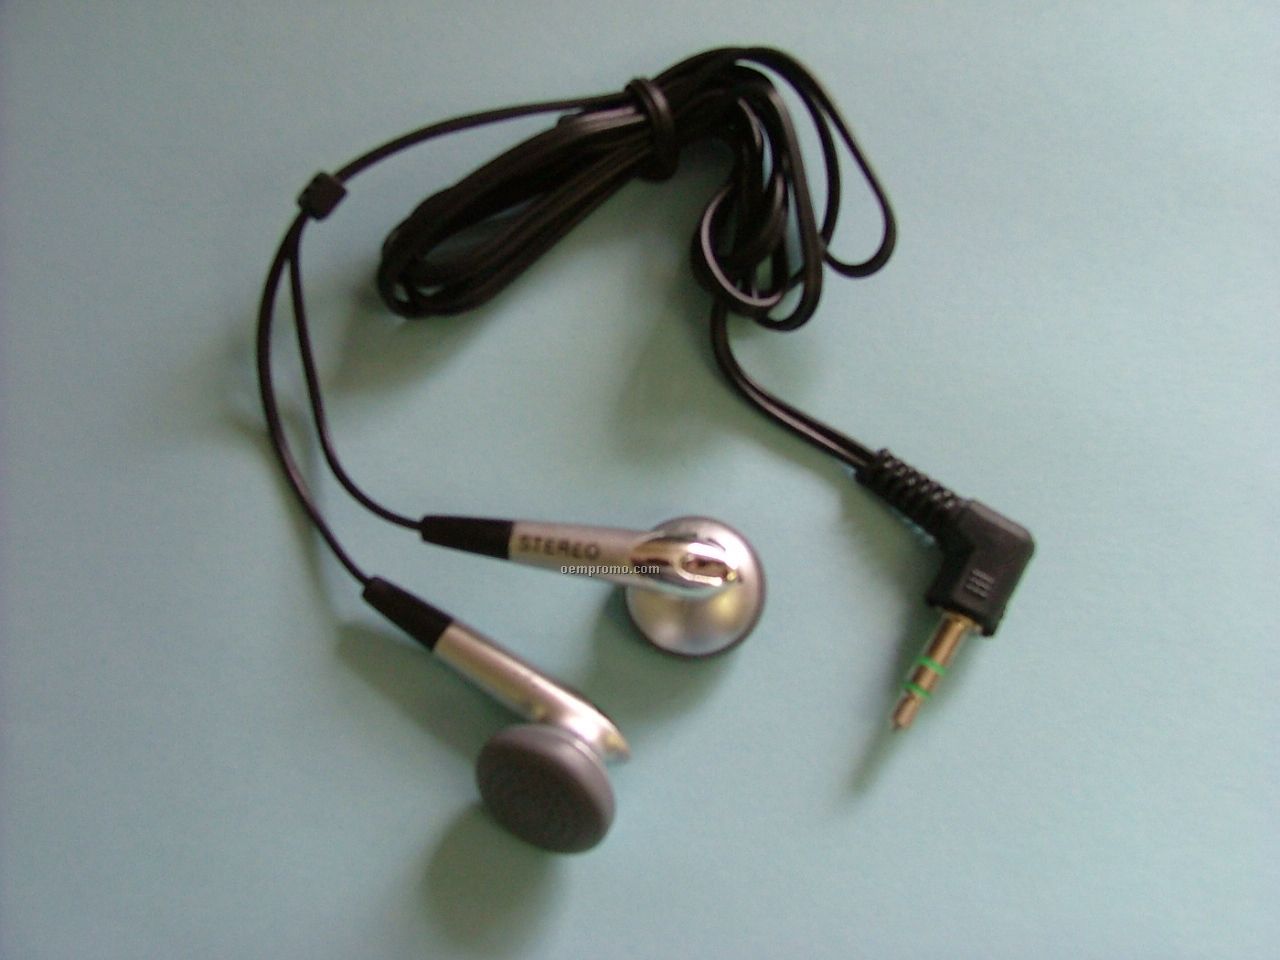 Audio Headphone W/ Universal Plug For All Audio Devices